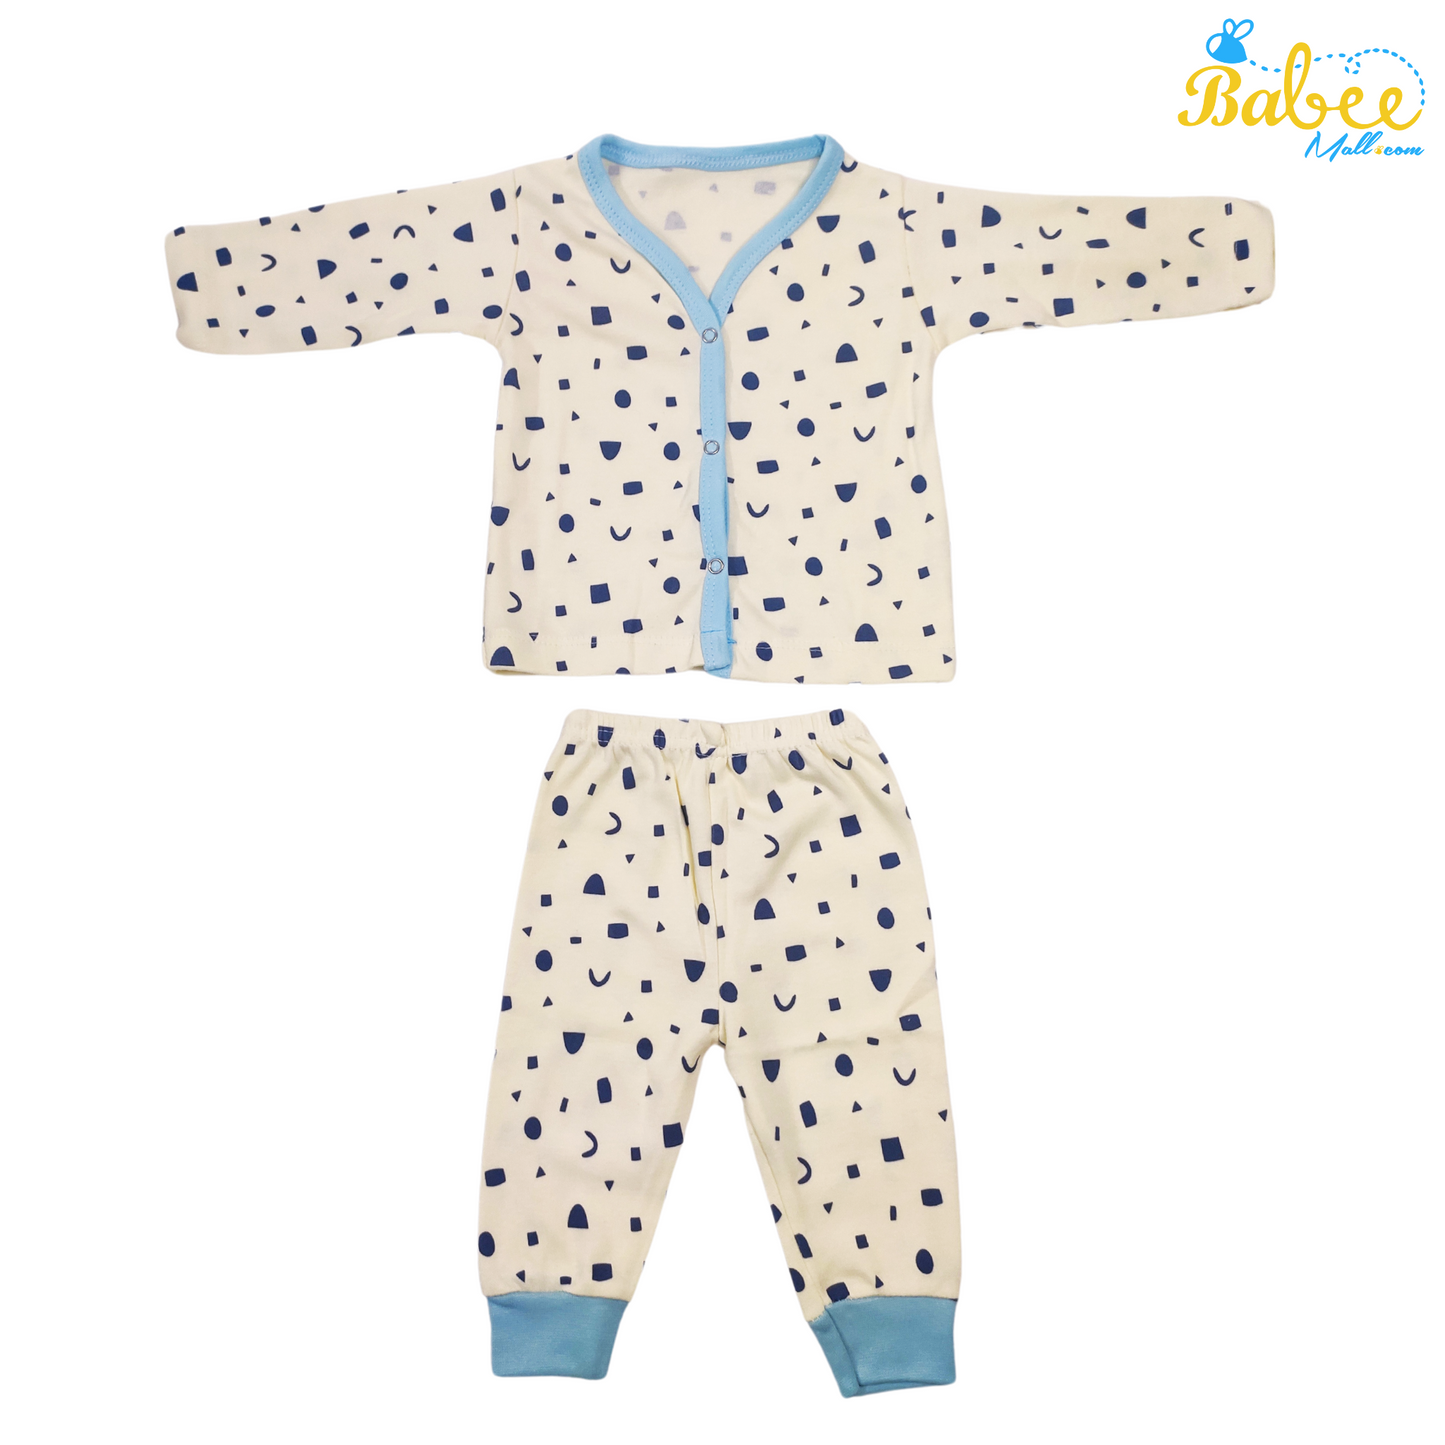 Cozy Newborn Baby Cotton Pajama Set - Snuggle-Ready Sleepwear for Cold Nights Dotted Shapes